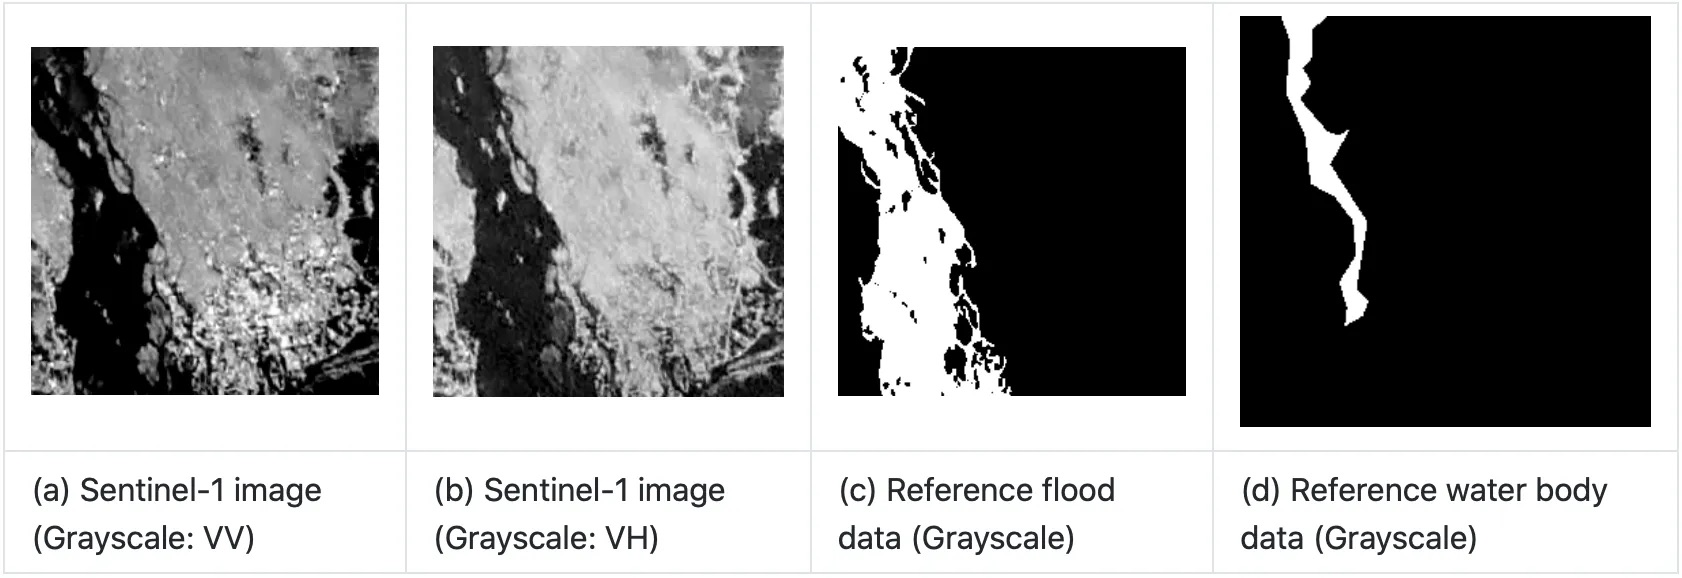 Four sequential black-and-white images, the first two showing satellite images, and the second two showing reference data